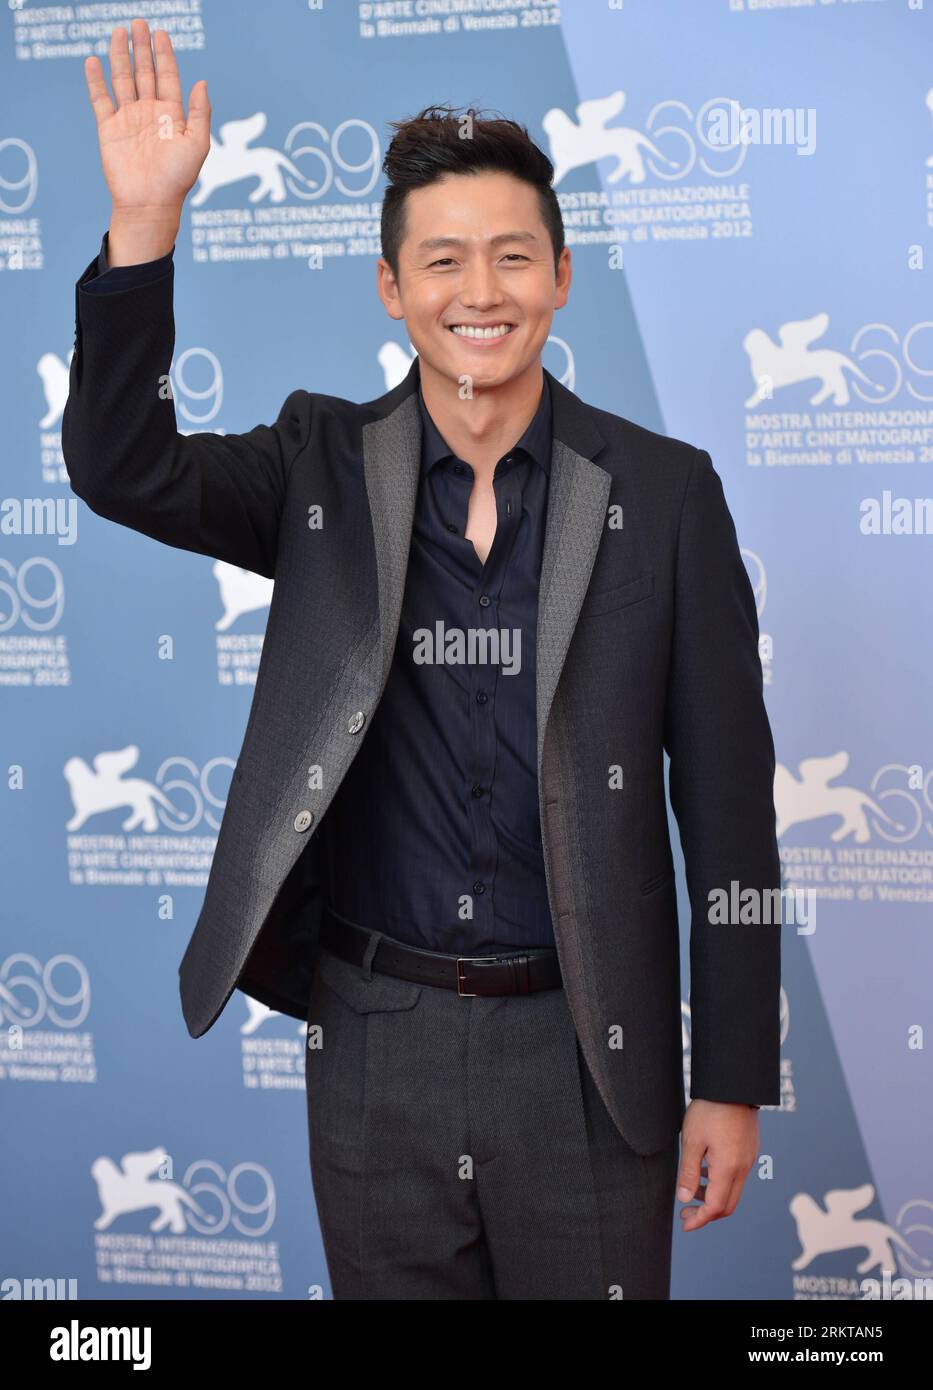 Bildnummer: 58427863  Datum: 04.09.2012  Copyright: imago/Xinhua (120904) -- VENICE, Sept. 4, 2012 (Xinhua) -- Actor Lee Jung-jin poses for photos at the photocall of the film Pieta at the 69th Venice International Film Festival in Venice, Italy, Sept. 4, 2012. (Xinhua/Wang Qingqin) (zf) ITALY-VENICE-FILM-FESTIVAL- PIETA PUBLICATIONxNOTxINxCHN People Film Festival 69. Internationales Filmfestival in Venedig x0x xdd premiumd 2012 hoch      58427863 Date 04 09 2012 Copyright Imago XINHUA  Venice Sept 4 2012 XINHUA Actor Lee Young Jin Poses for Photos AT The photo call of The Film Pietà AT The 69 Stock Photo